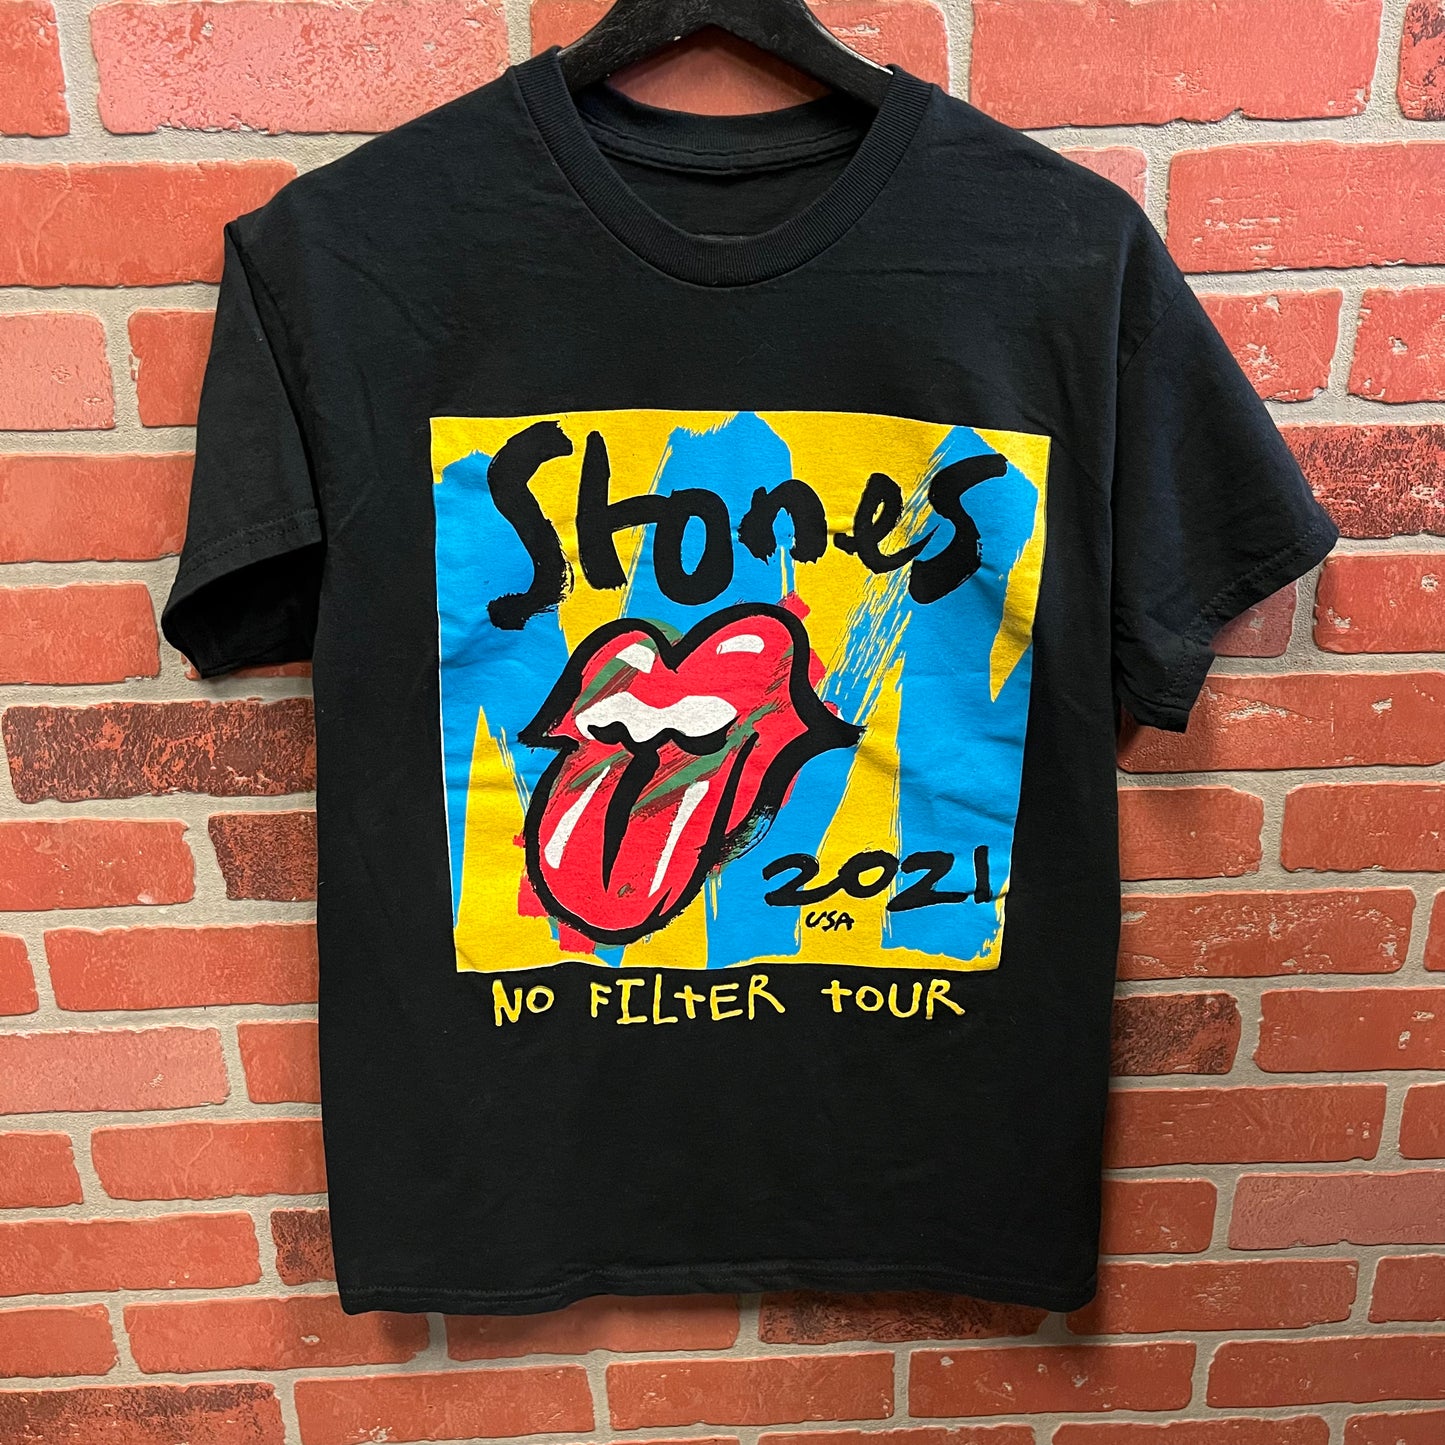 The Rolling Stones 2021 Tour Tee